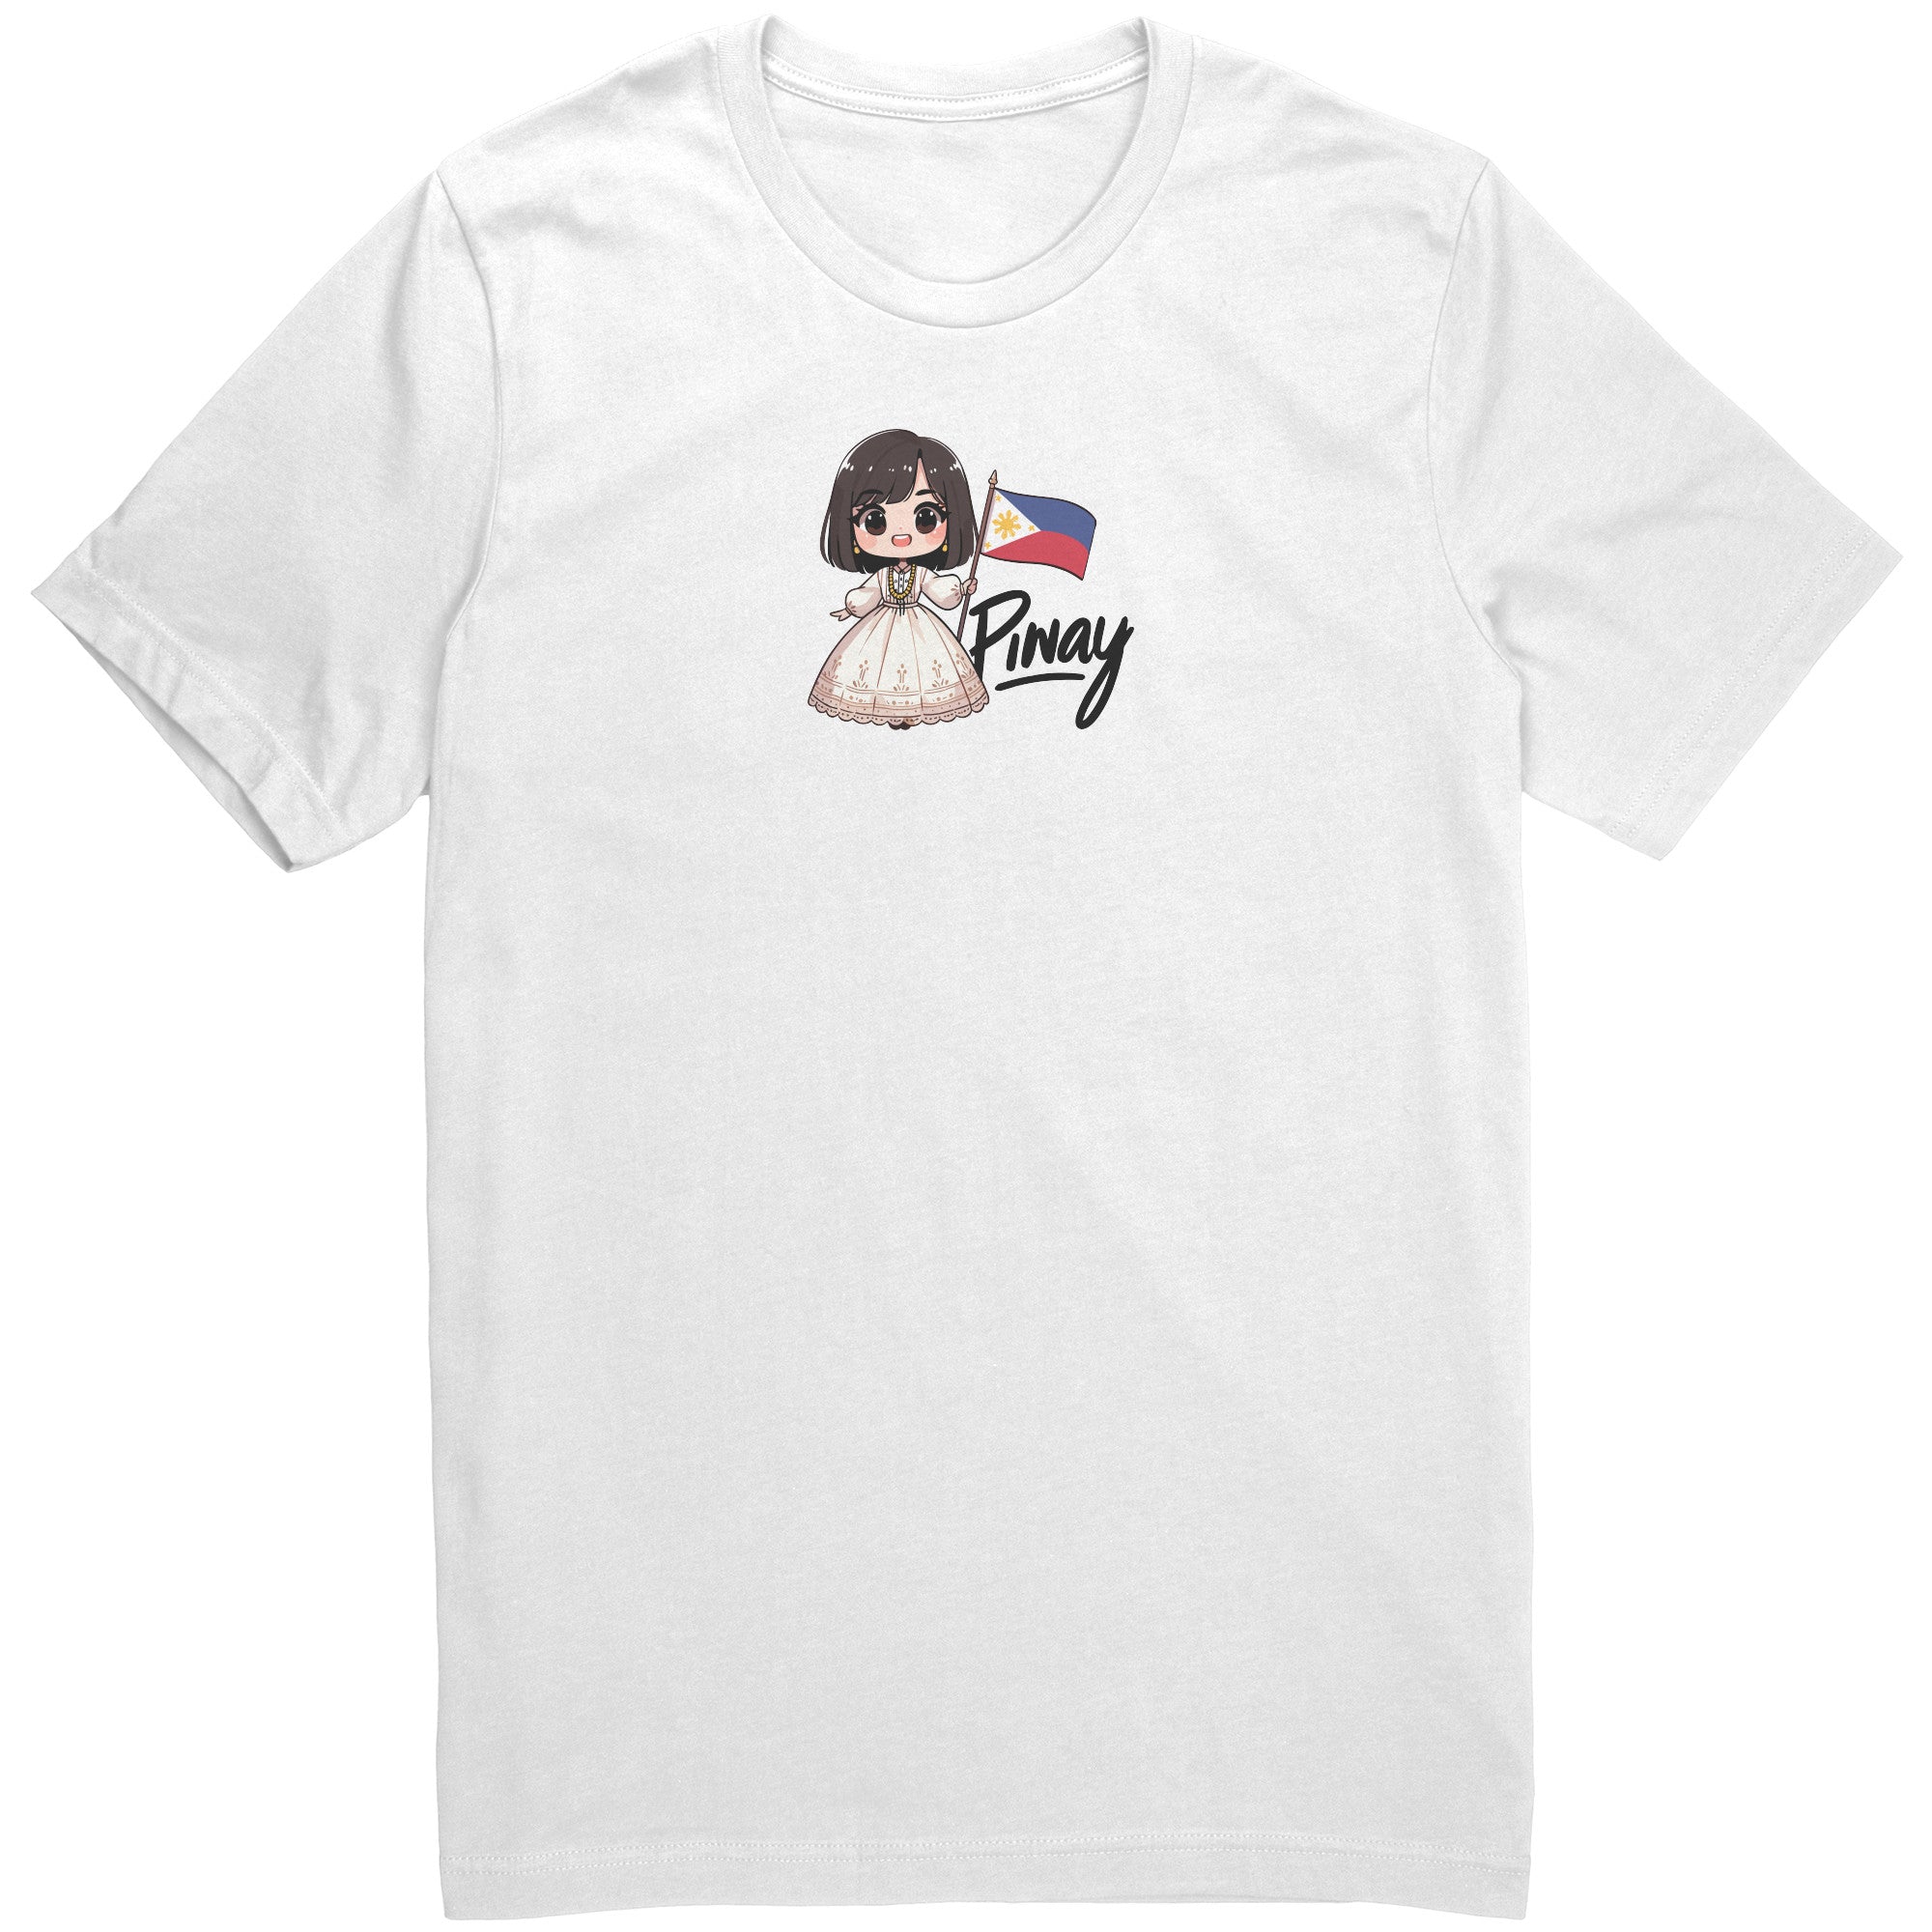 "Cute Cartoon Filipino Pride T-shirt - Vibrant Pinoy Pride Tee - Perfect Gift for Filipinos - Colorful Philippines Heritage Tee" - J